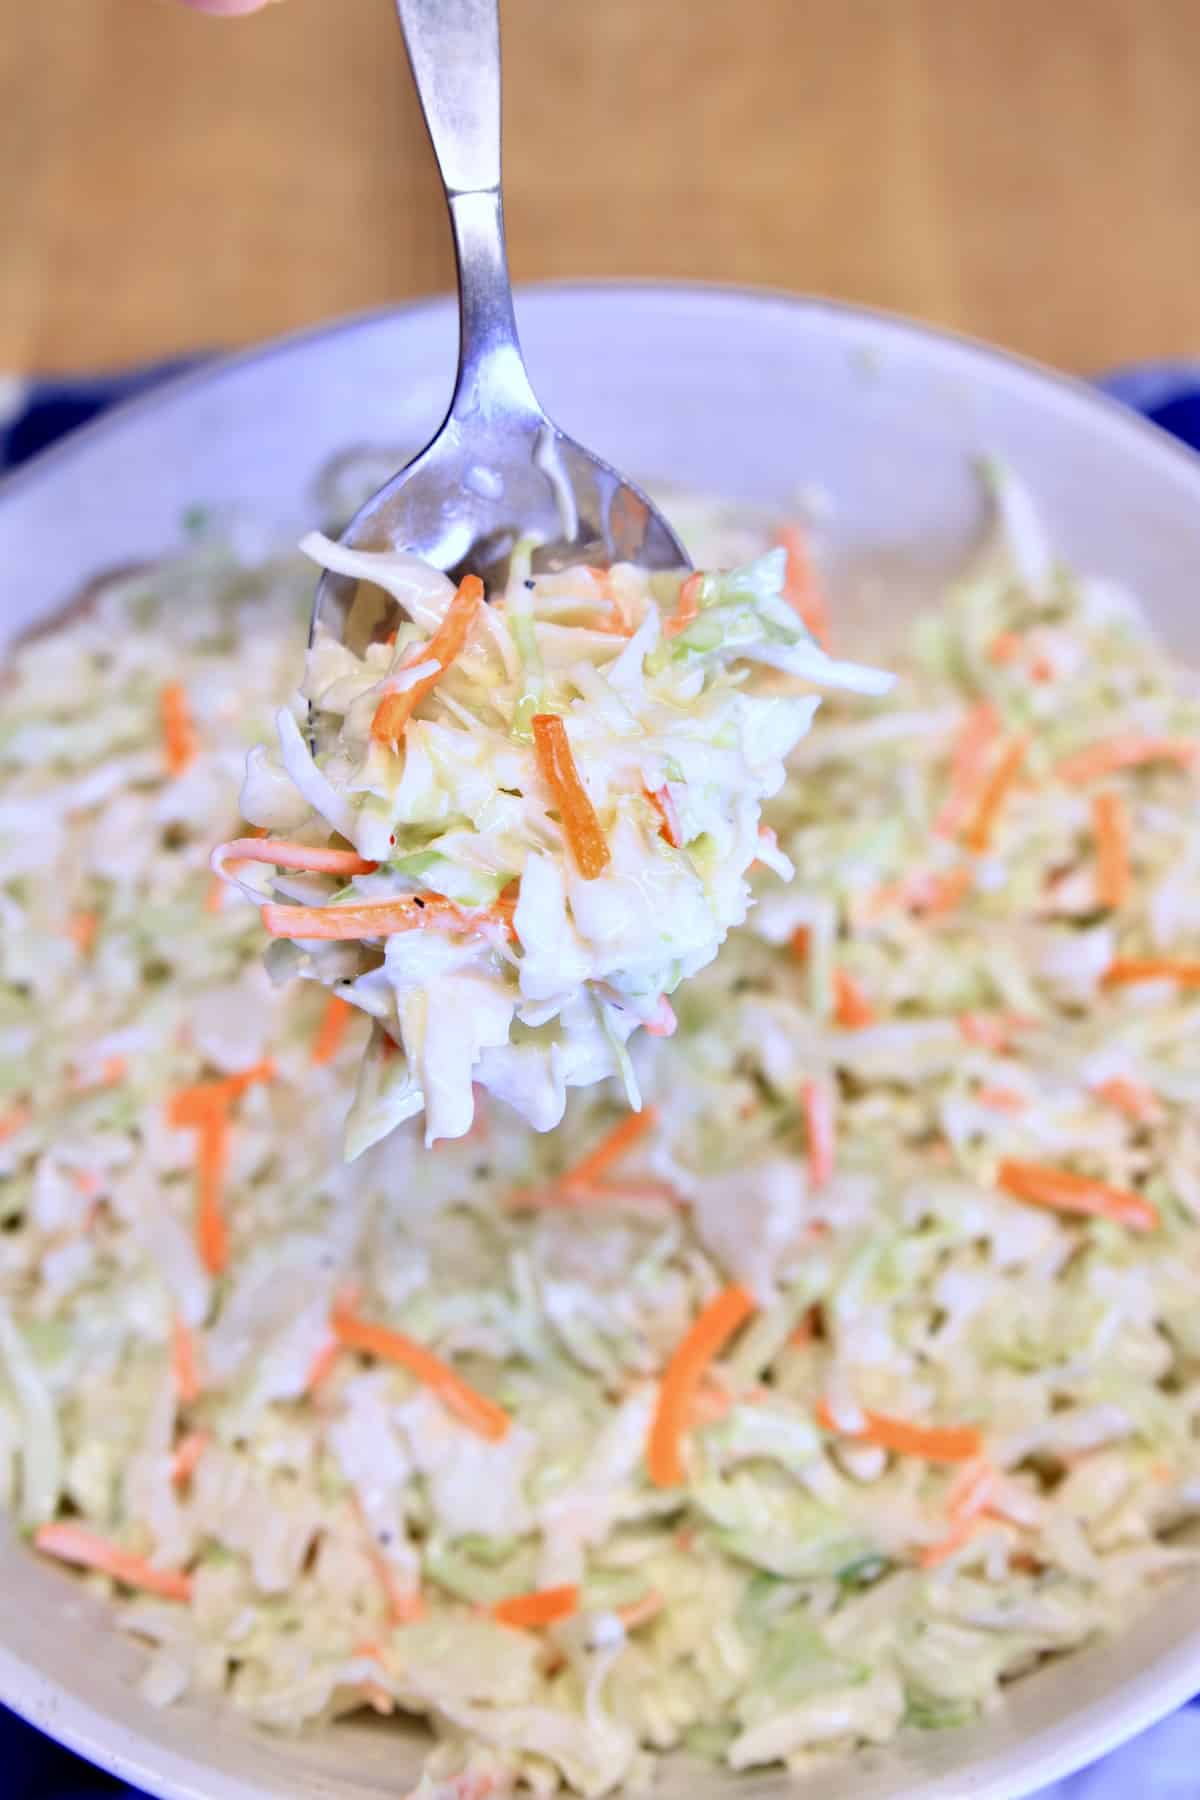 Spoonful of coleslaw over a bowl.